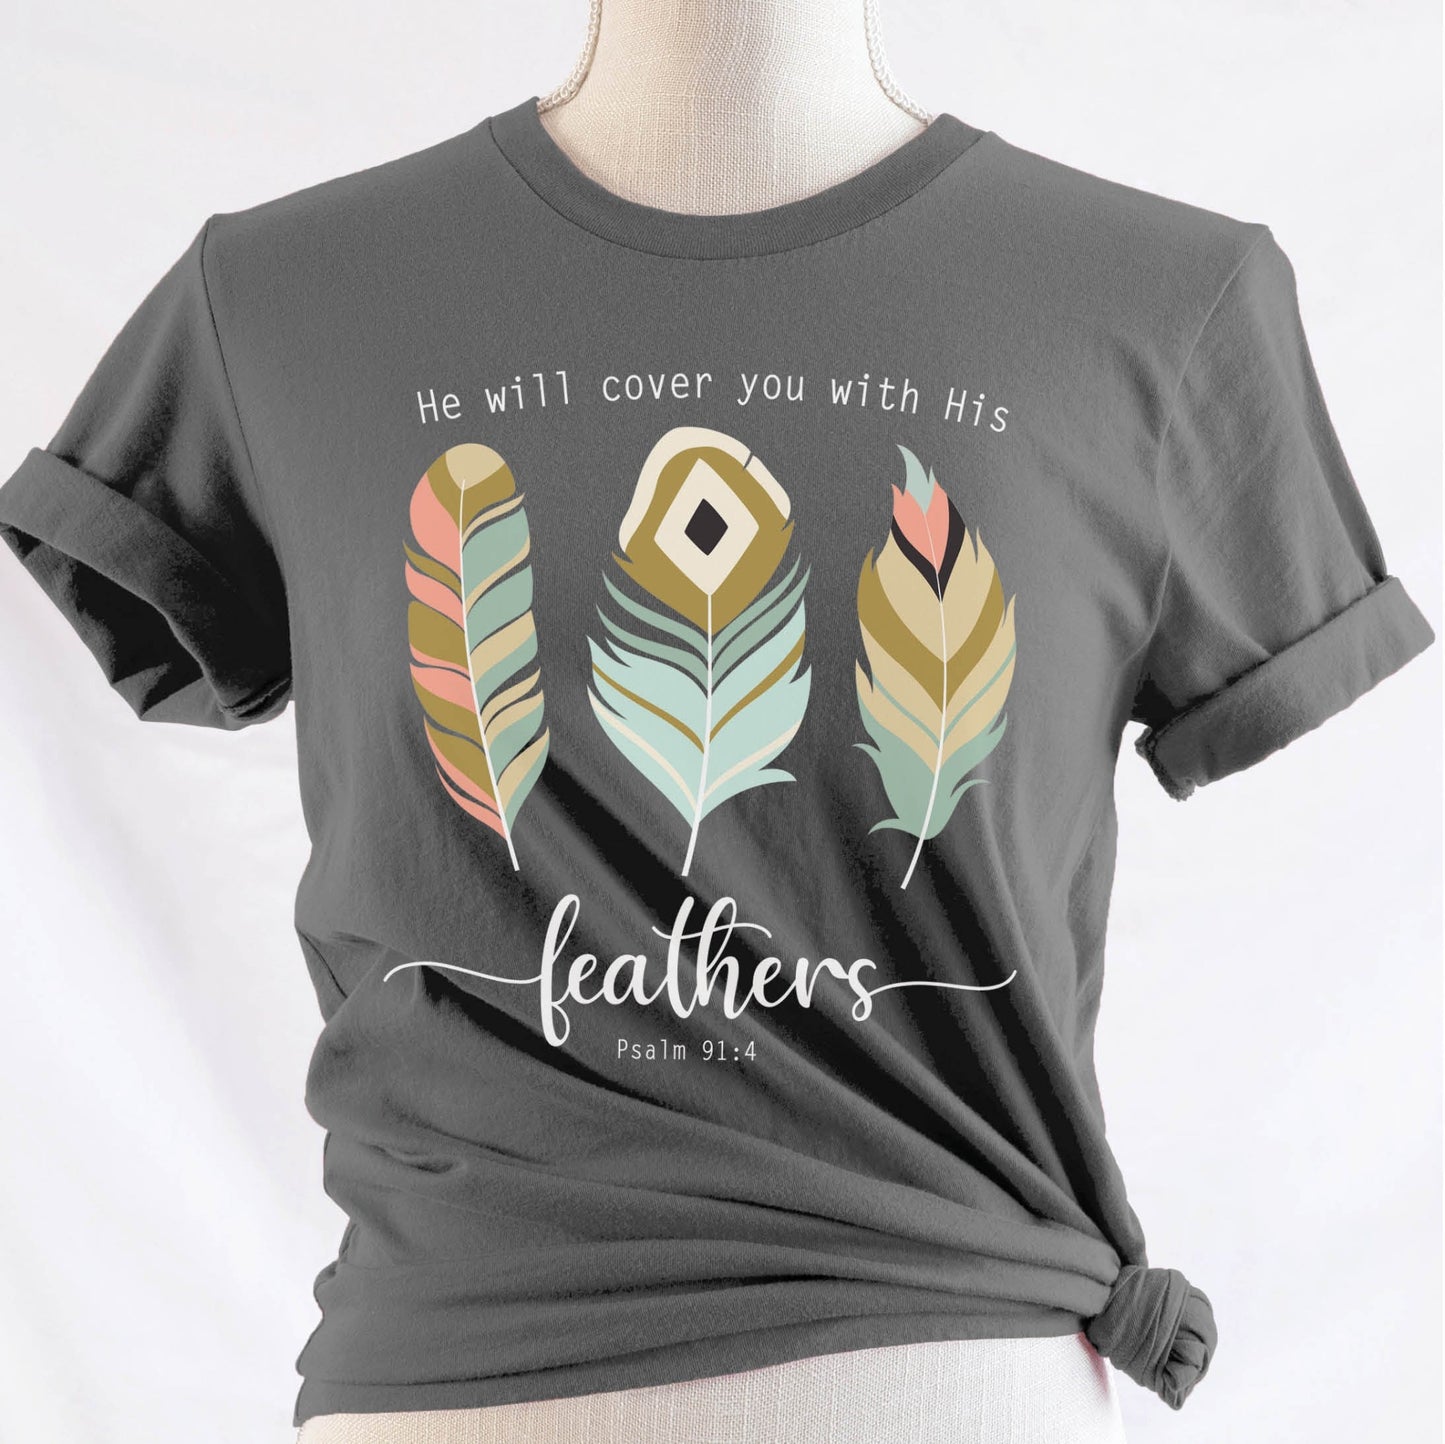 Psalm 91:4 "He Will Cover You With His Feathers" boho bible verse Christian woman aesthetic with teal peach and gold feathers printed on soft asphalt gray unisex t-shirt for women